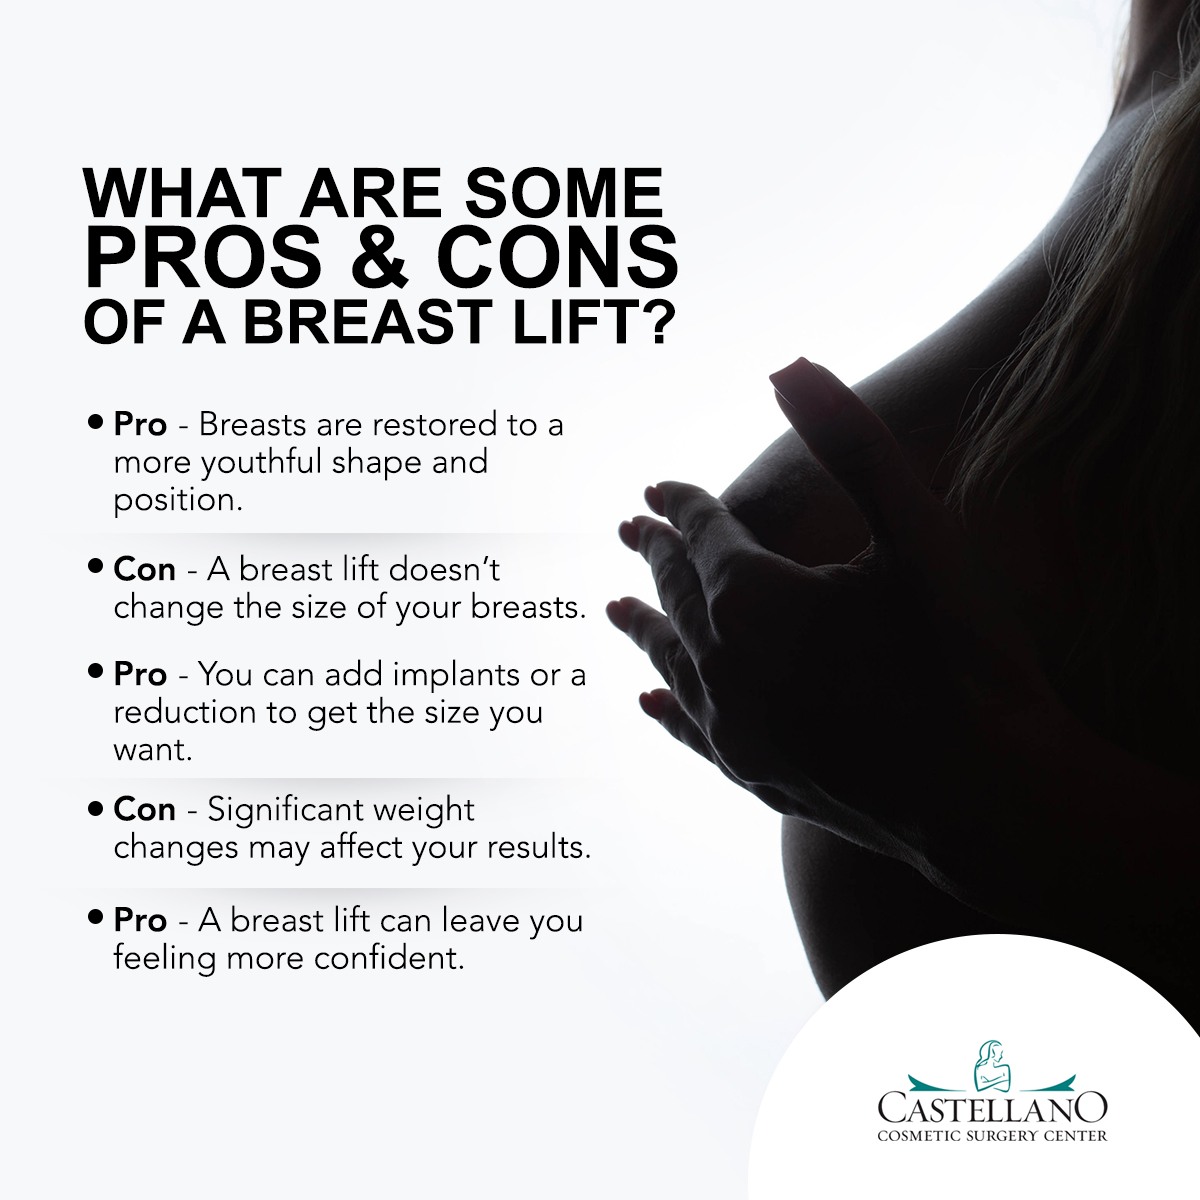 What Are Some Pros & Cons of a Breast Lift?